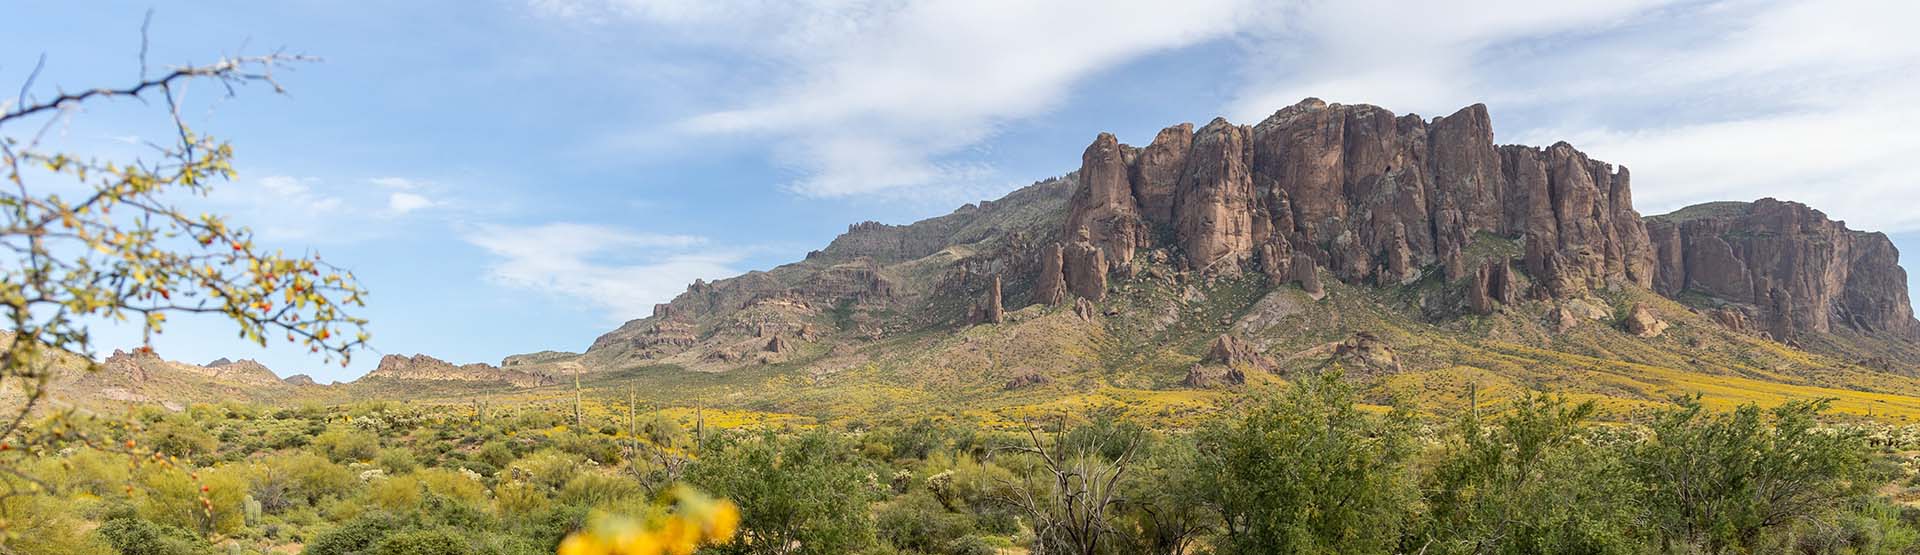 A mountain in the distance, surrounded by blooming desert vegetation.